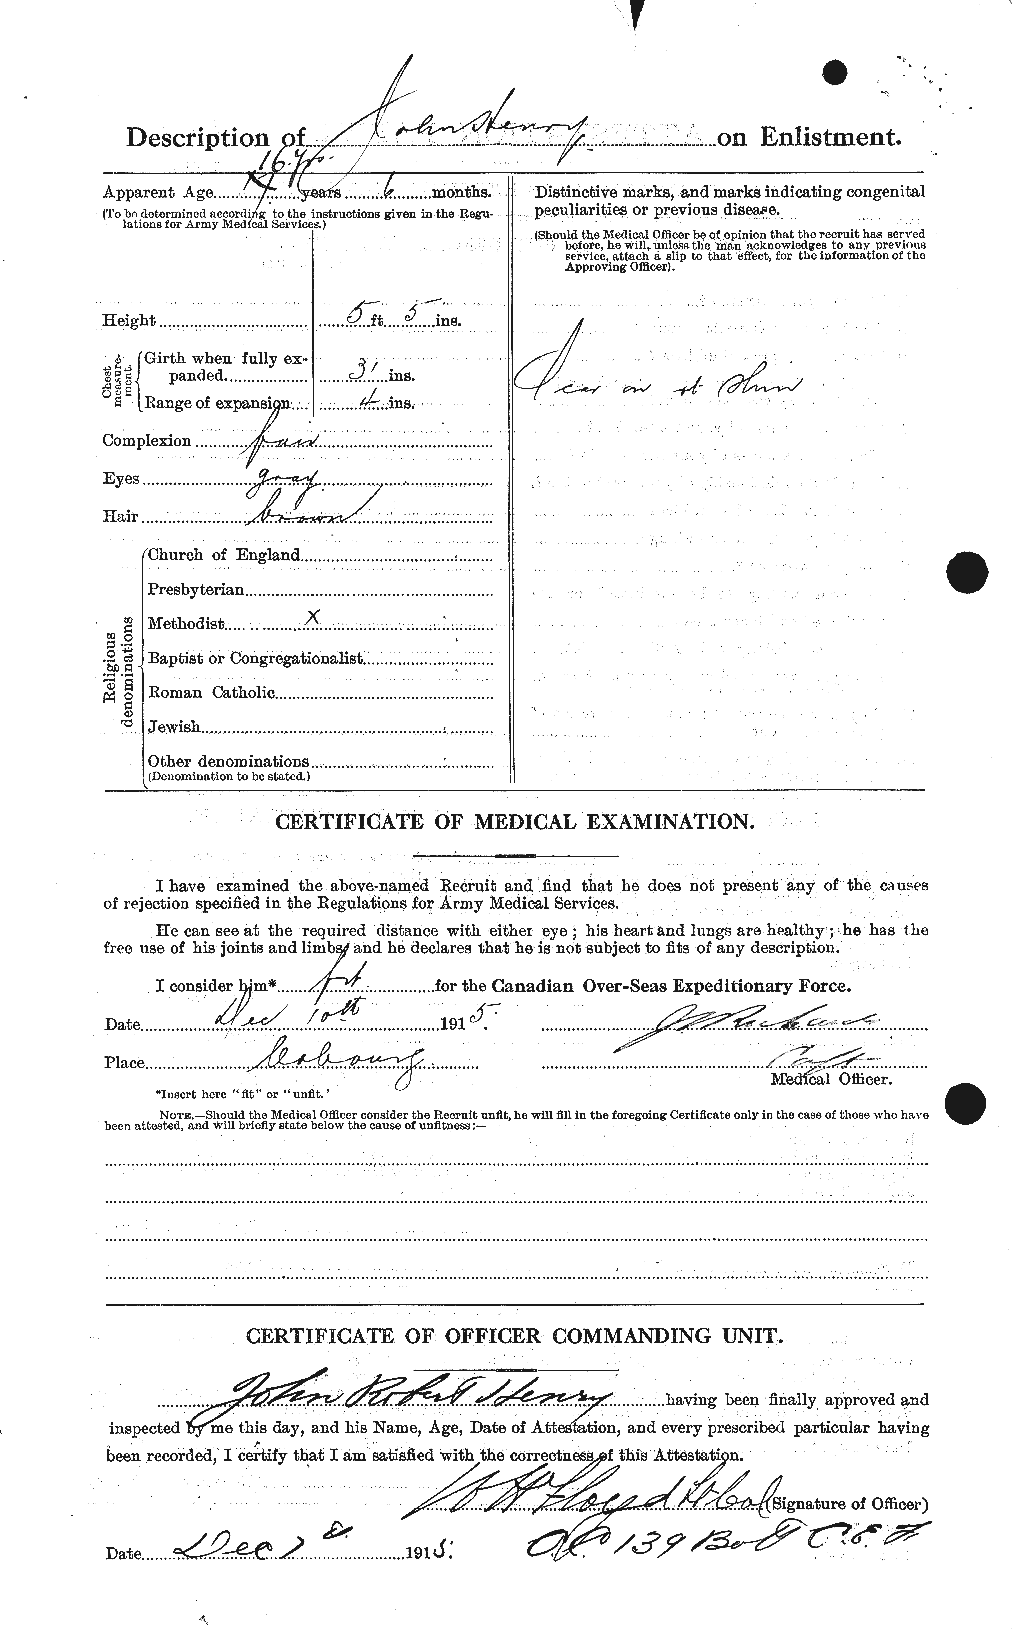 Personnel Records of the First World War - CEF 387630b